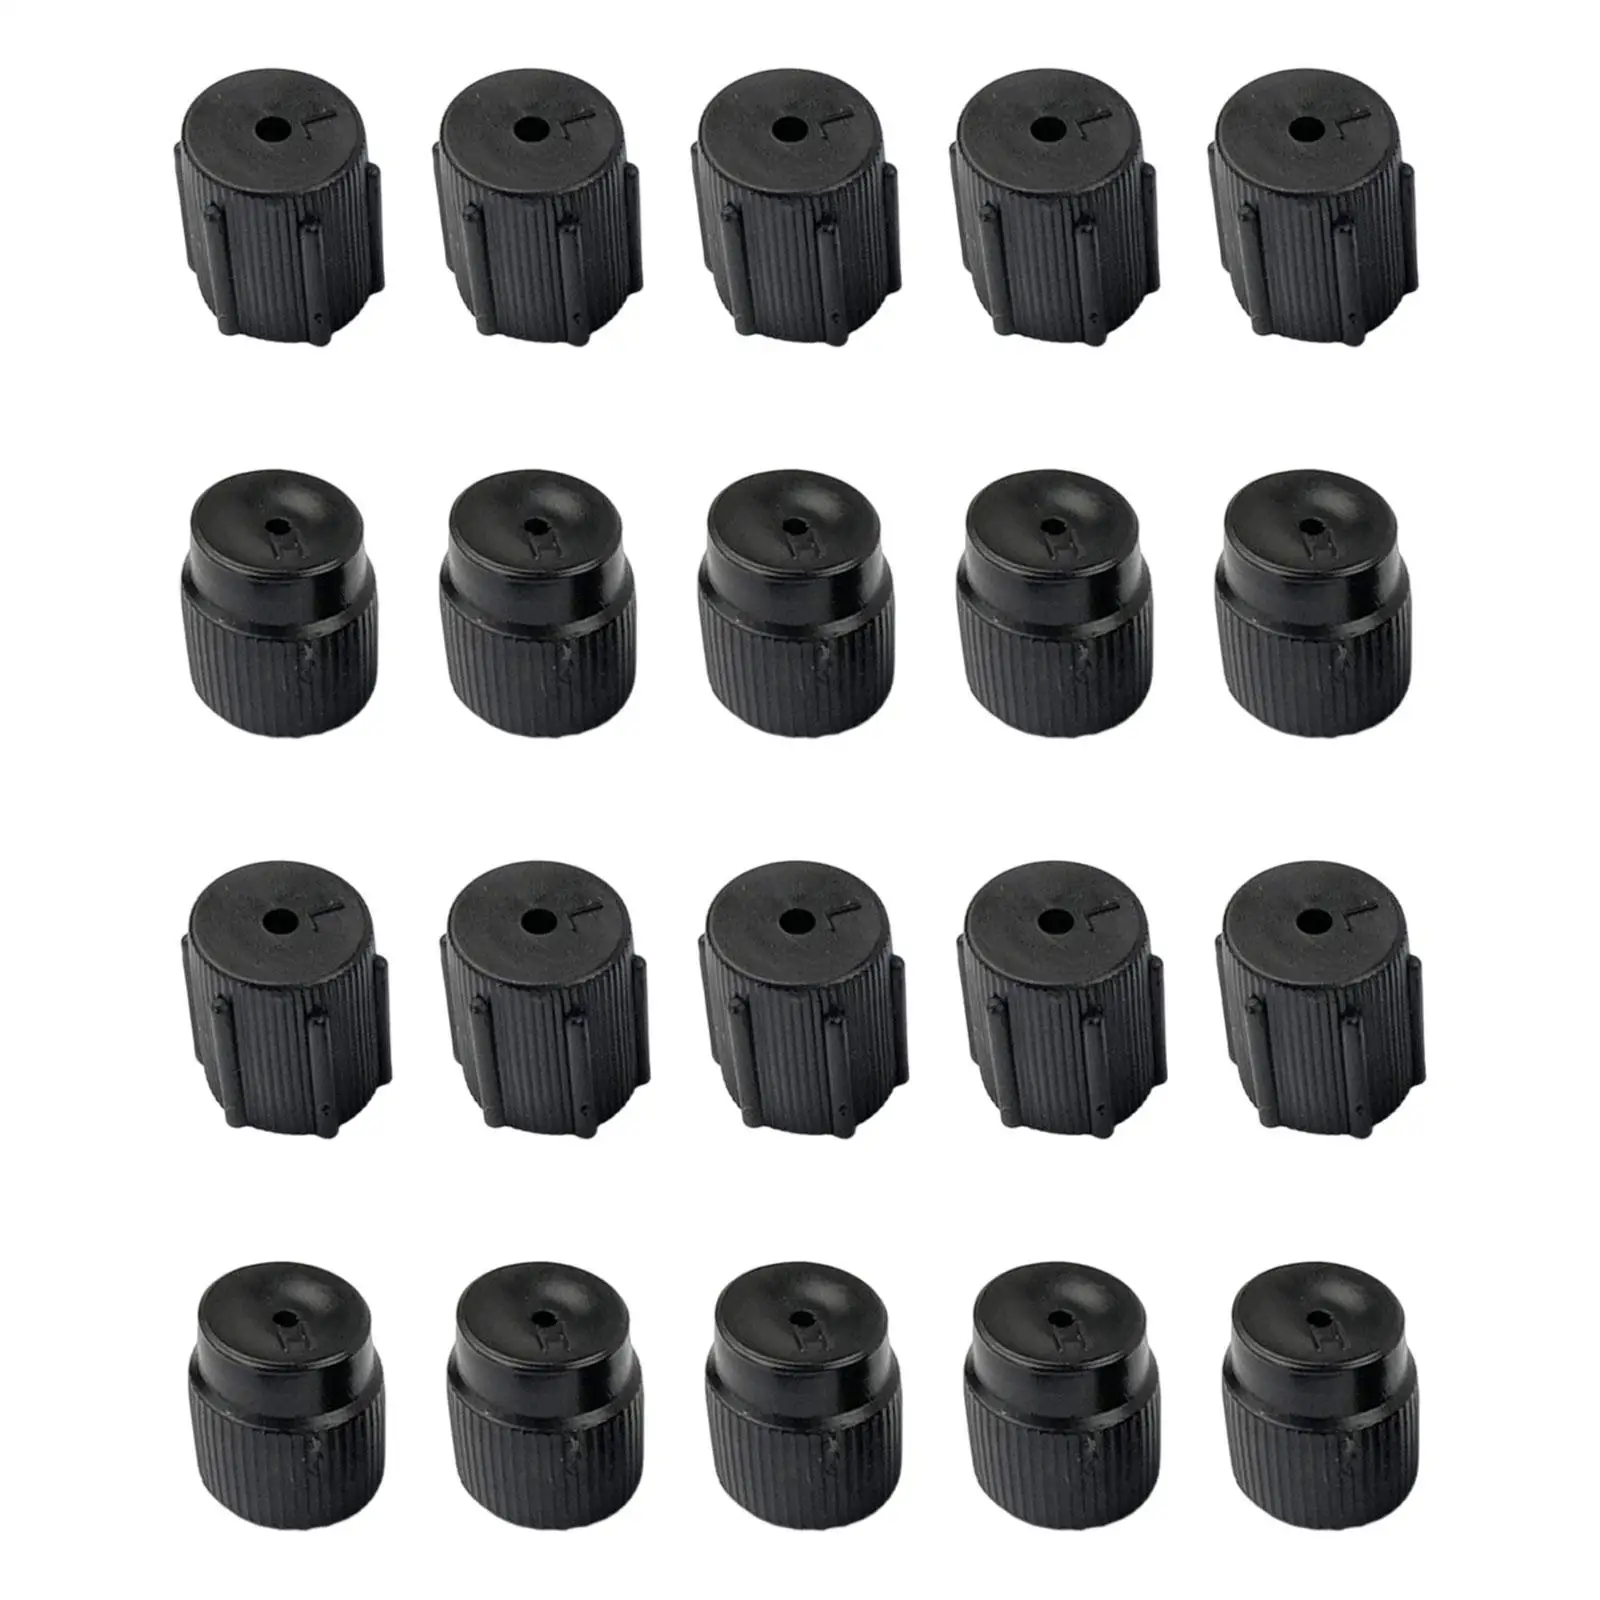 20Pcs AC System Accessories Auto Accessory Repair Hat Leakproof Easy to Use Universal High Pressure AC System Caps Set AC Cap